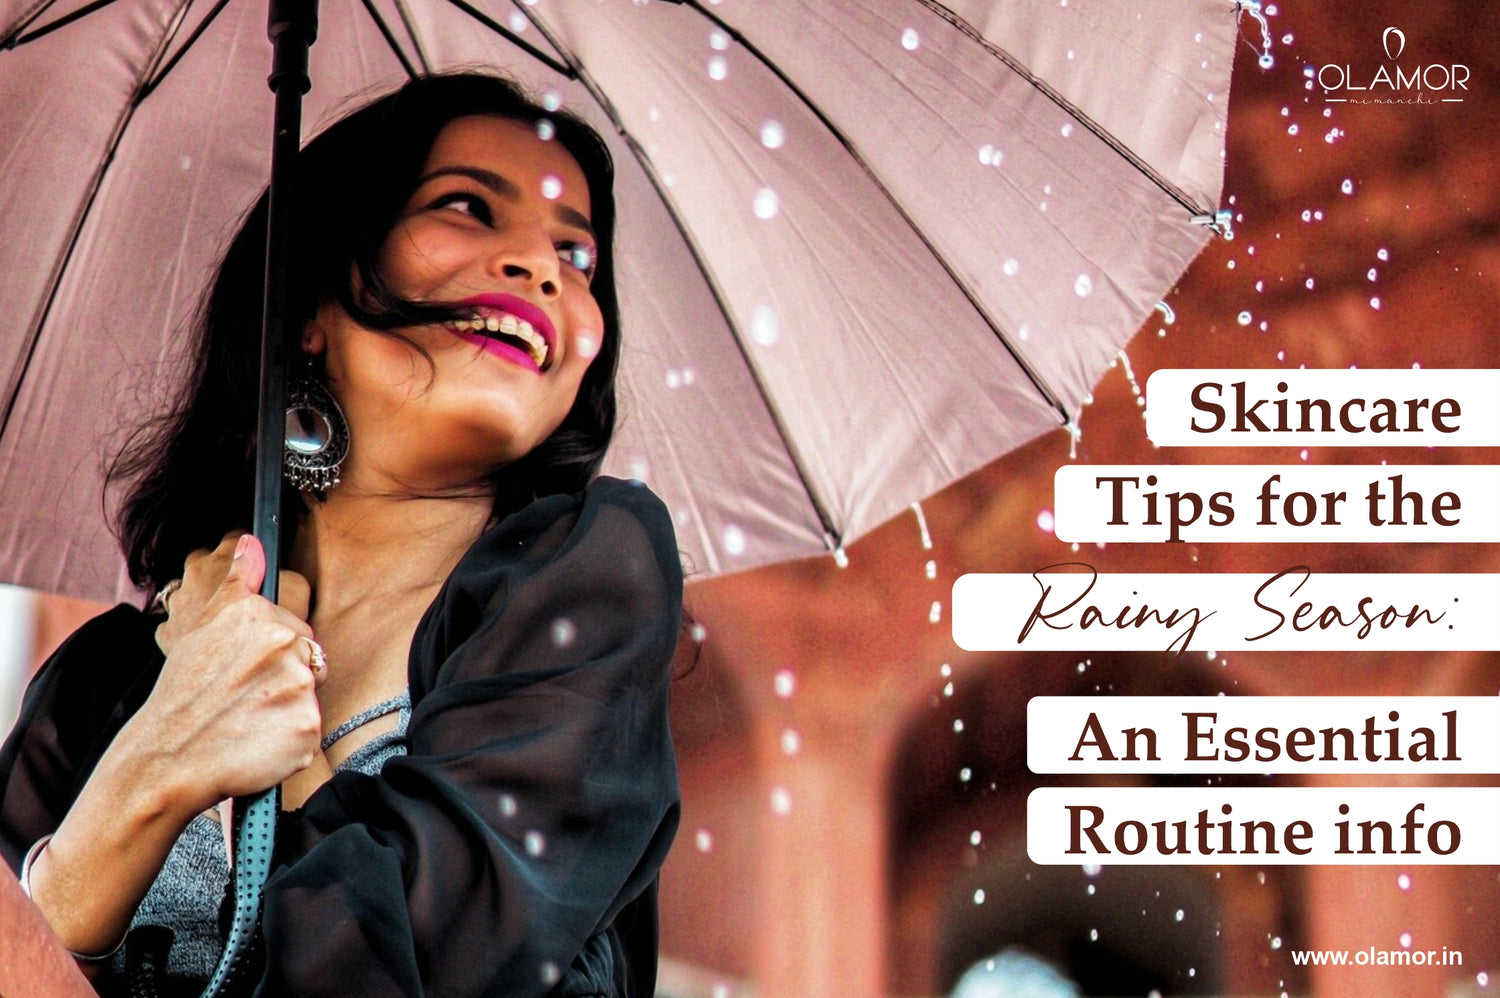 SKINCARE TIPS FOR THE RAINY SEASON: AN ESSENTIAL ROUTINE